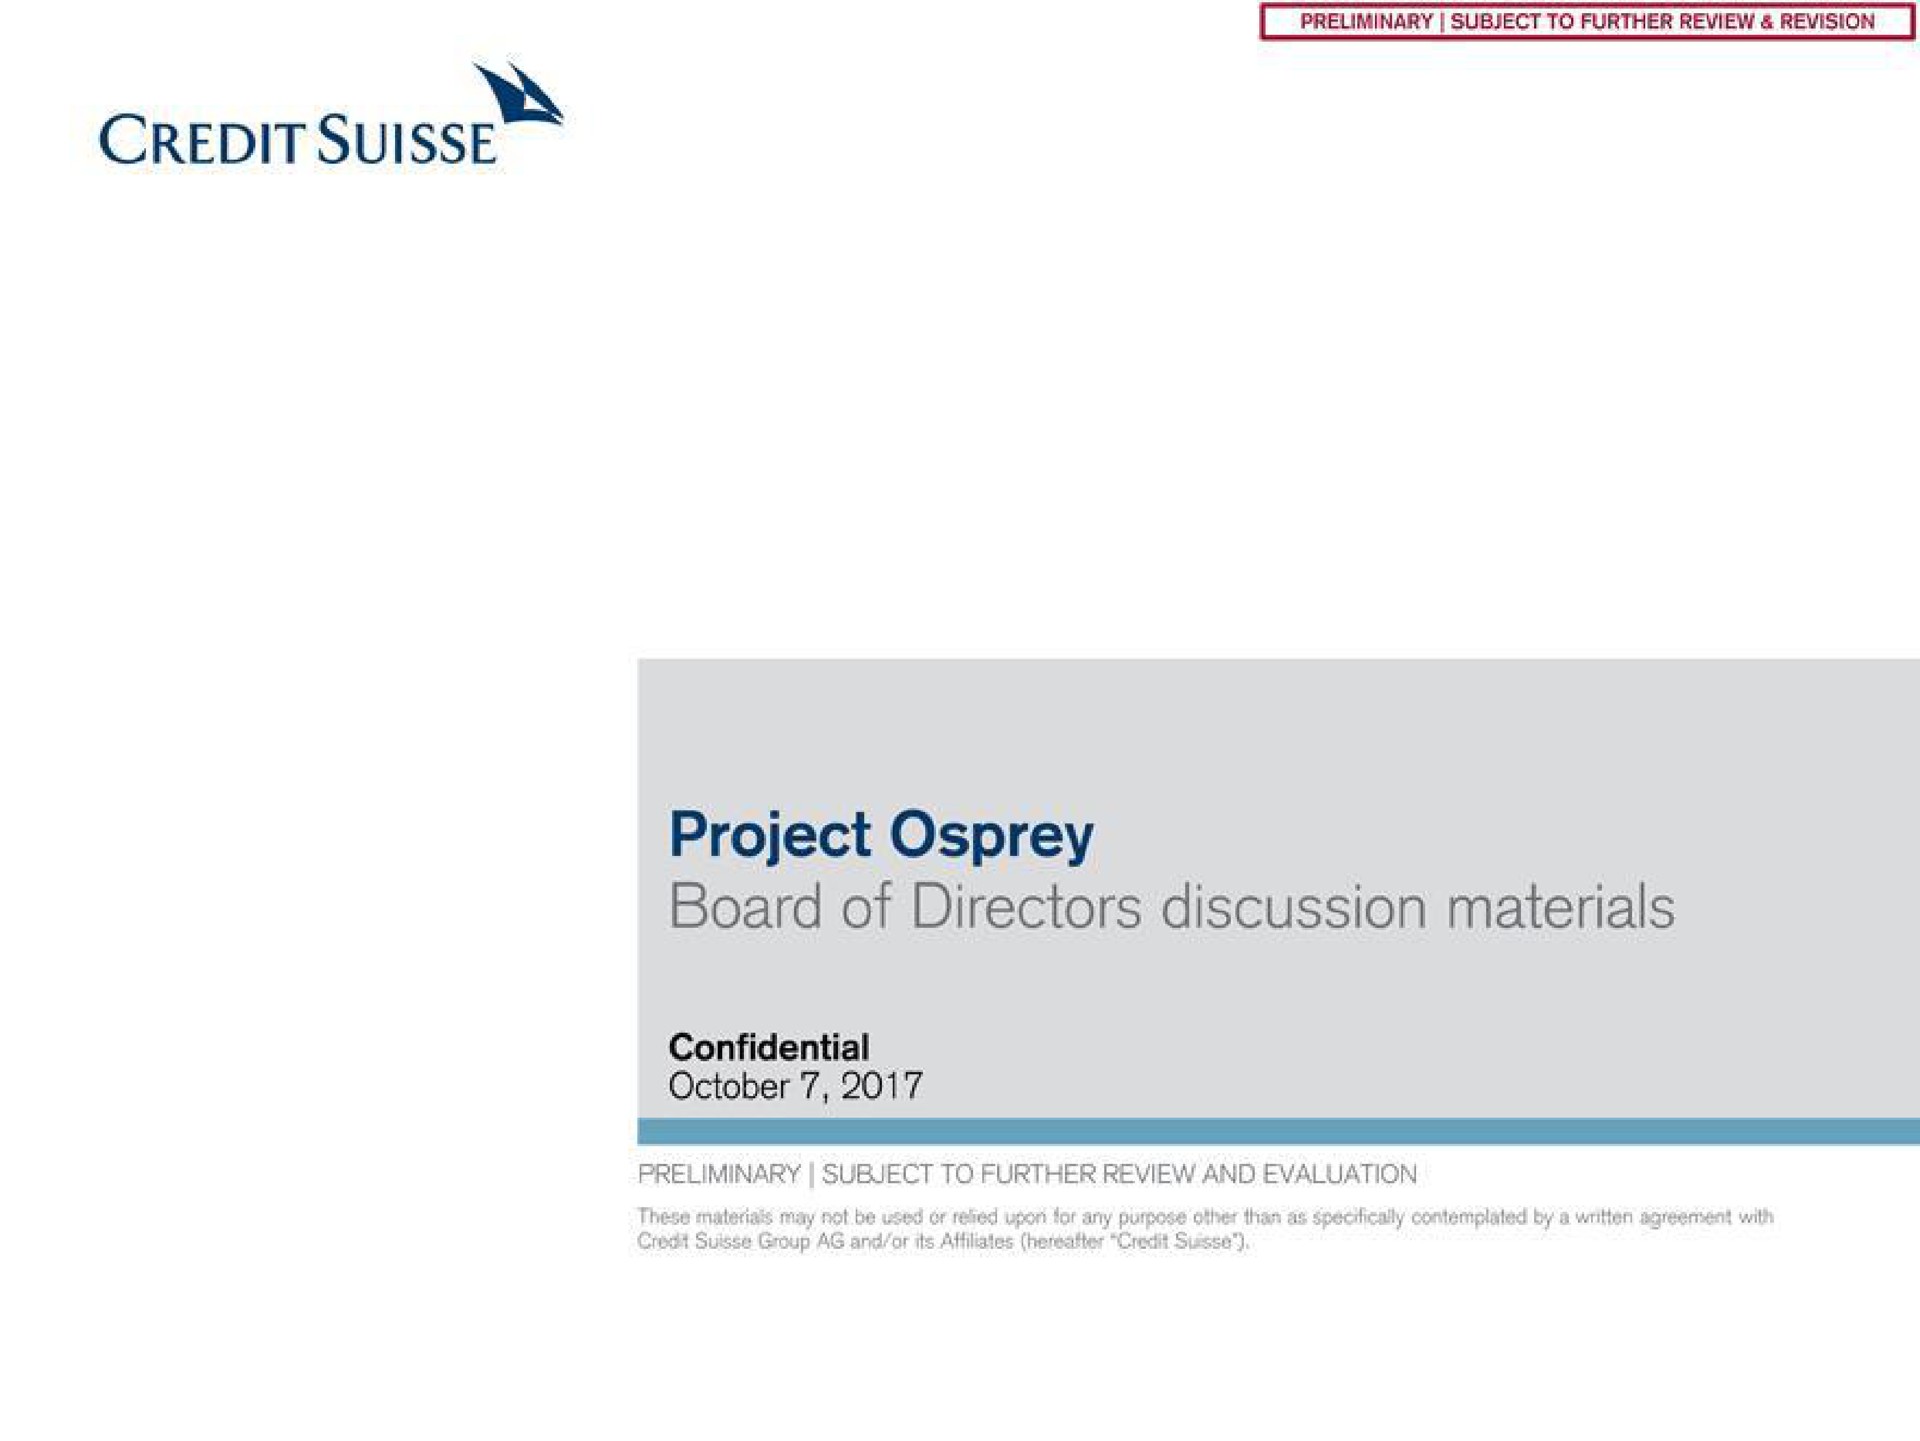 credit project osprey board of directors discussion materials | Credit Suisse